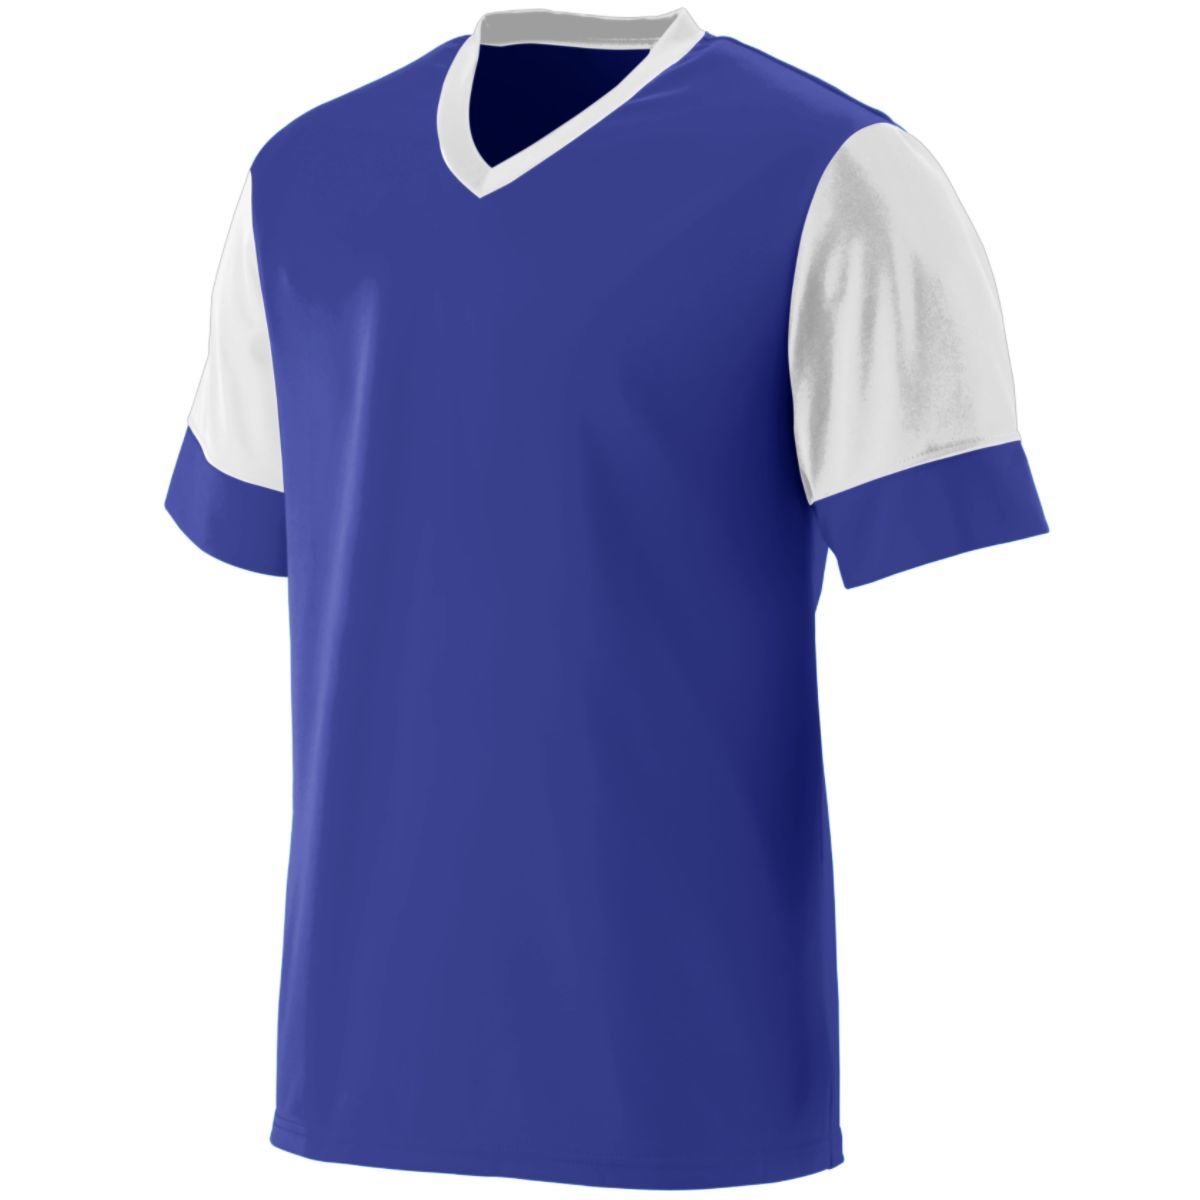 Augusta Sportswear Youth Lightning Jersey in Purple/White  -Part of the Youth, Youth-Jersey, Augusta-Products, Soccer, Shirts, All-Sports-1 product lines at KanaleyCreations.com